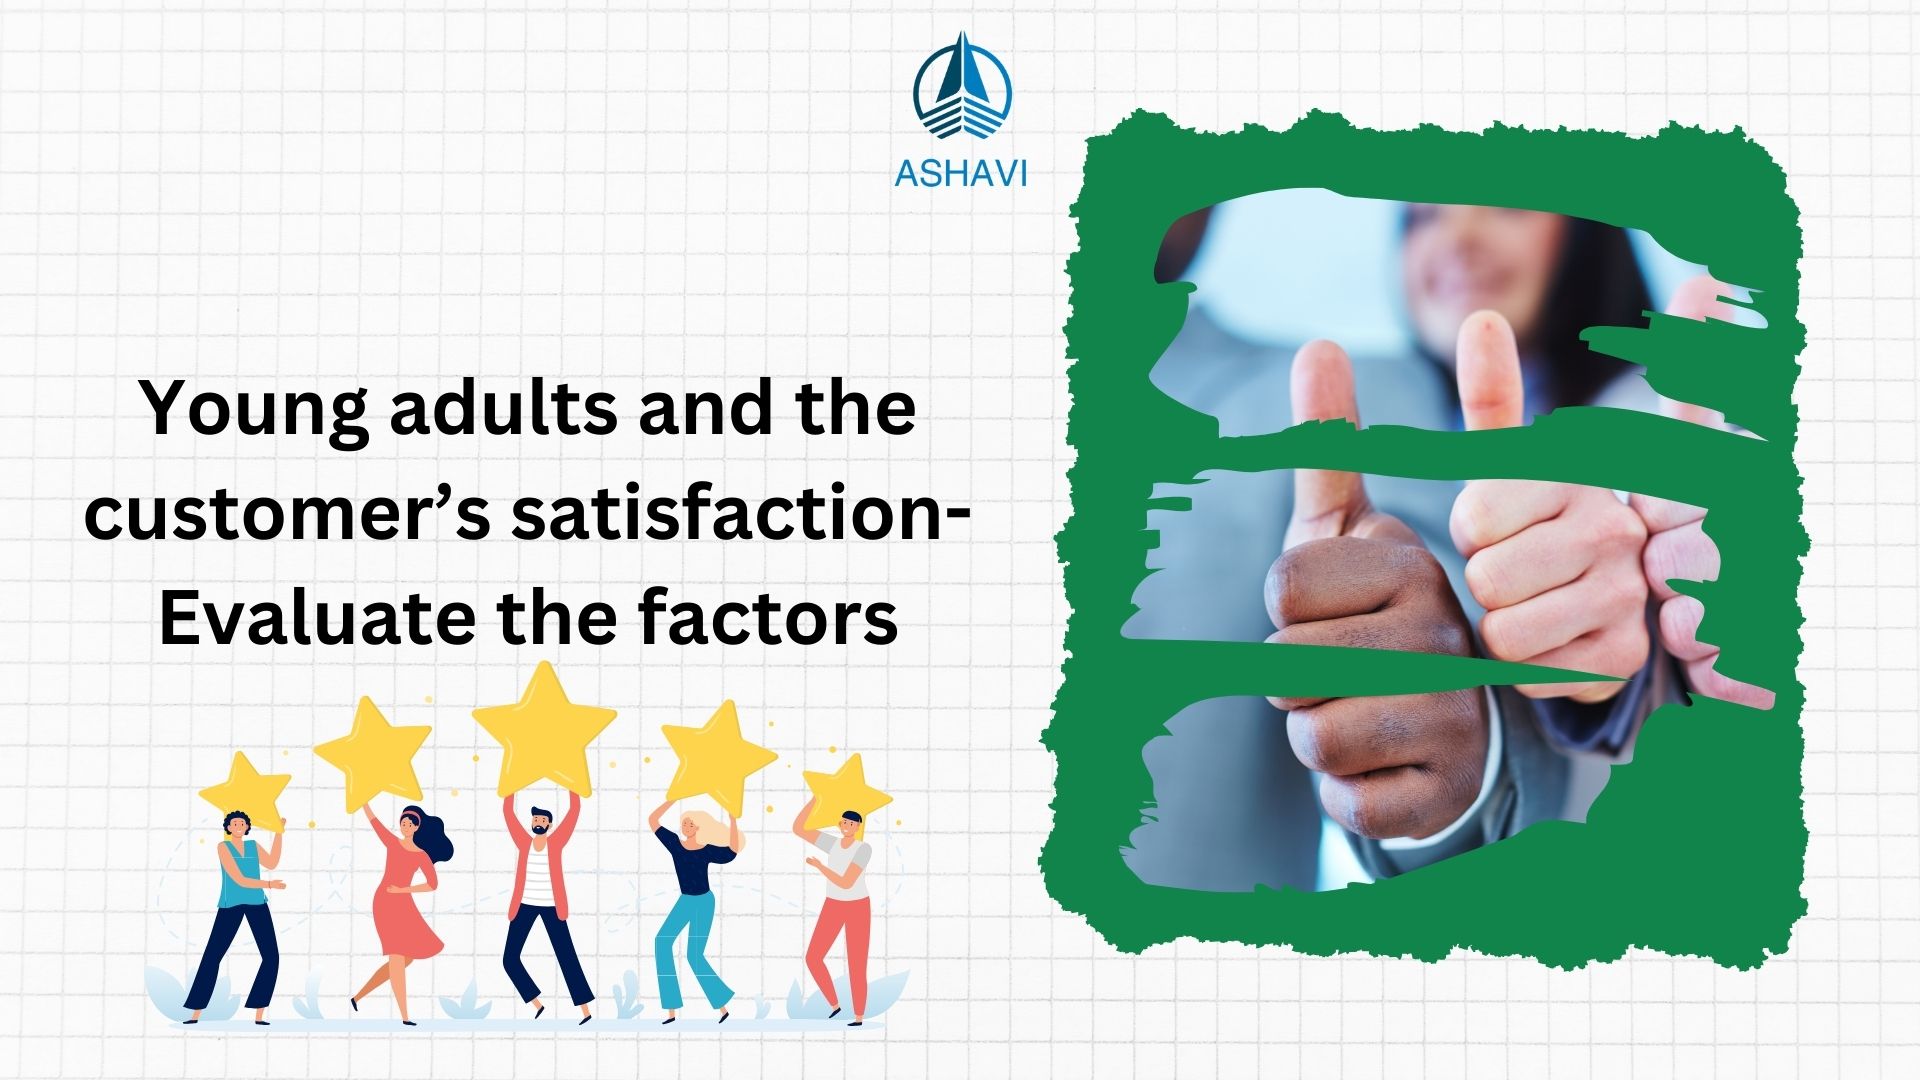 Young adults and the customer’s satisfaction- Evaluate the factors